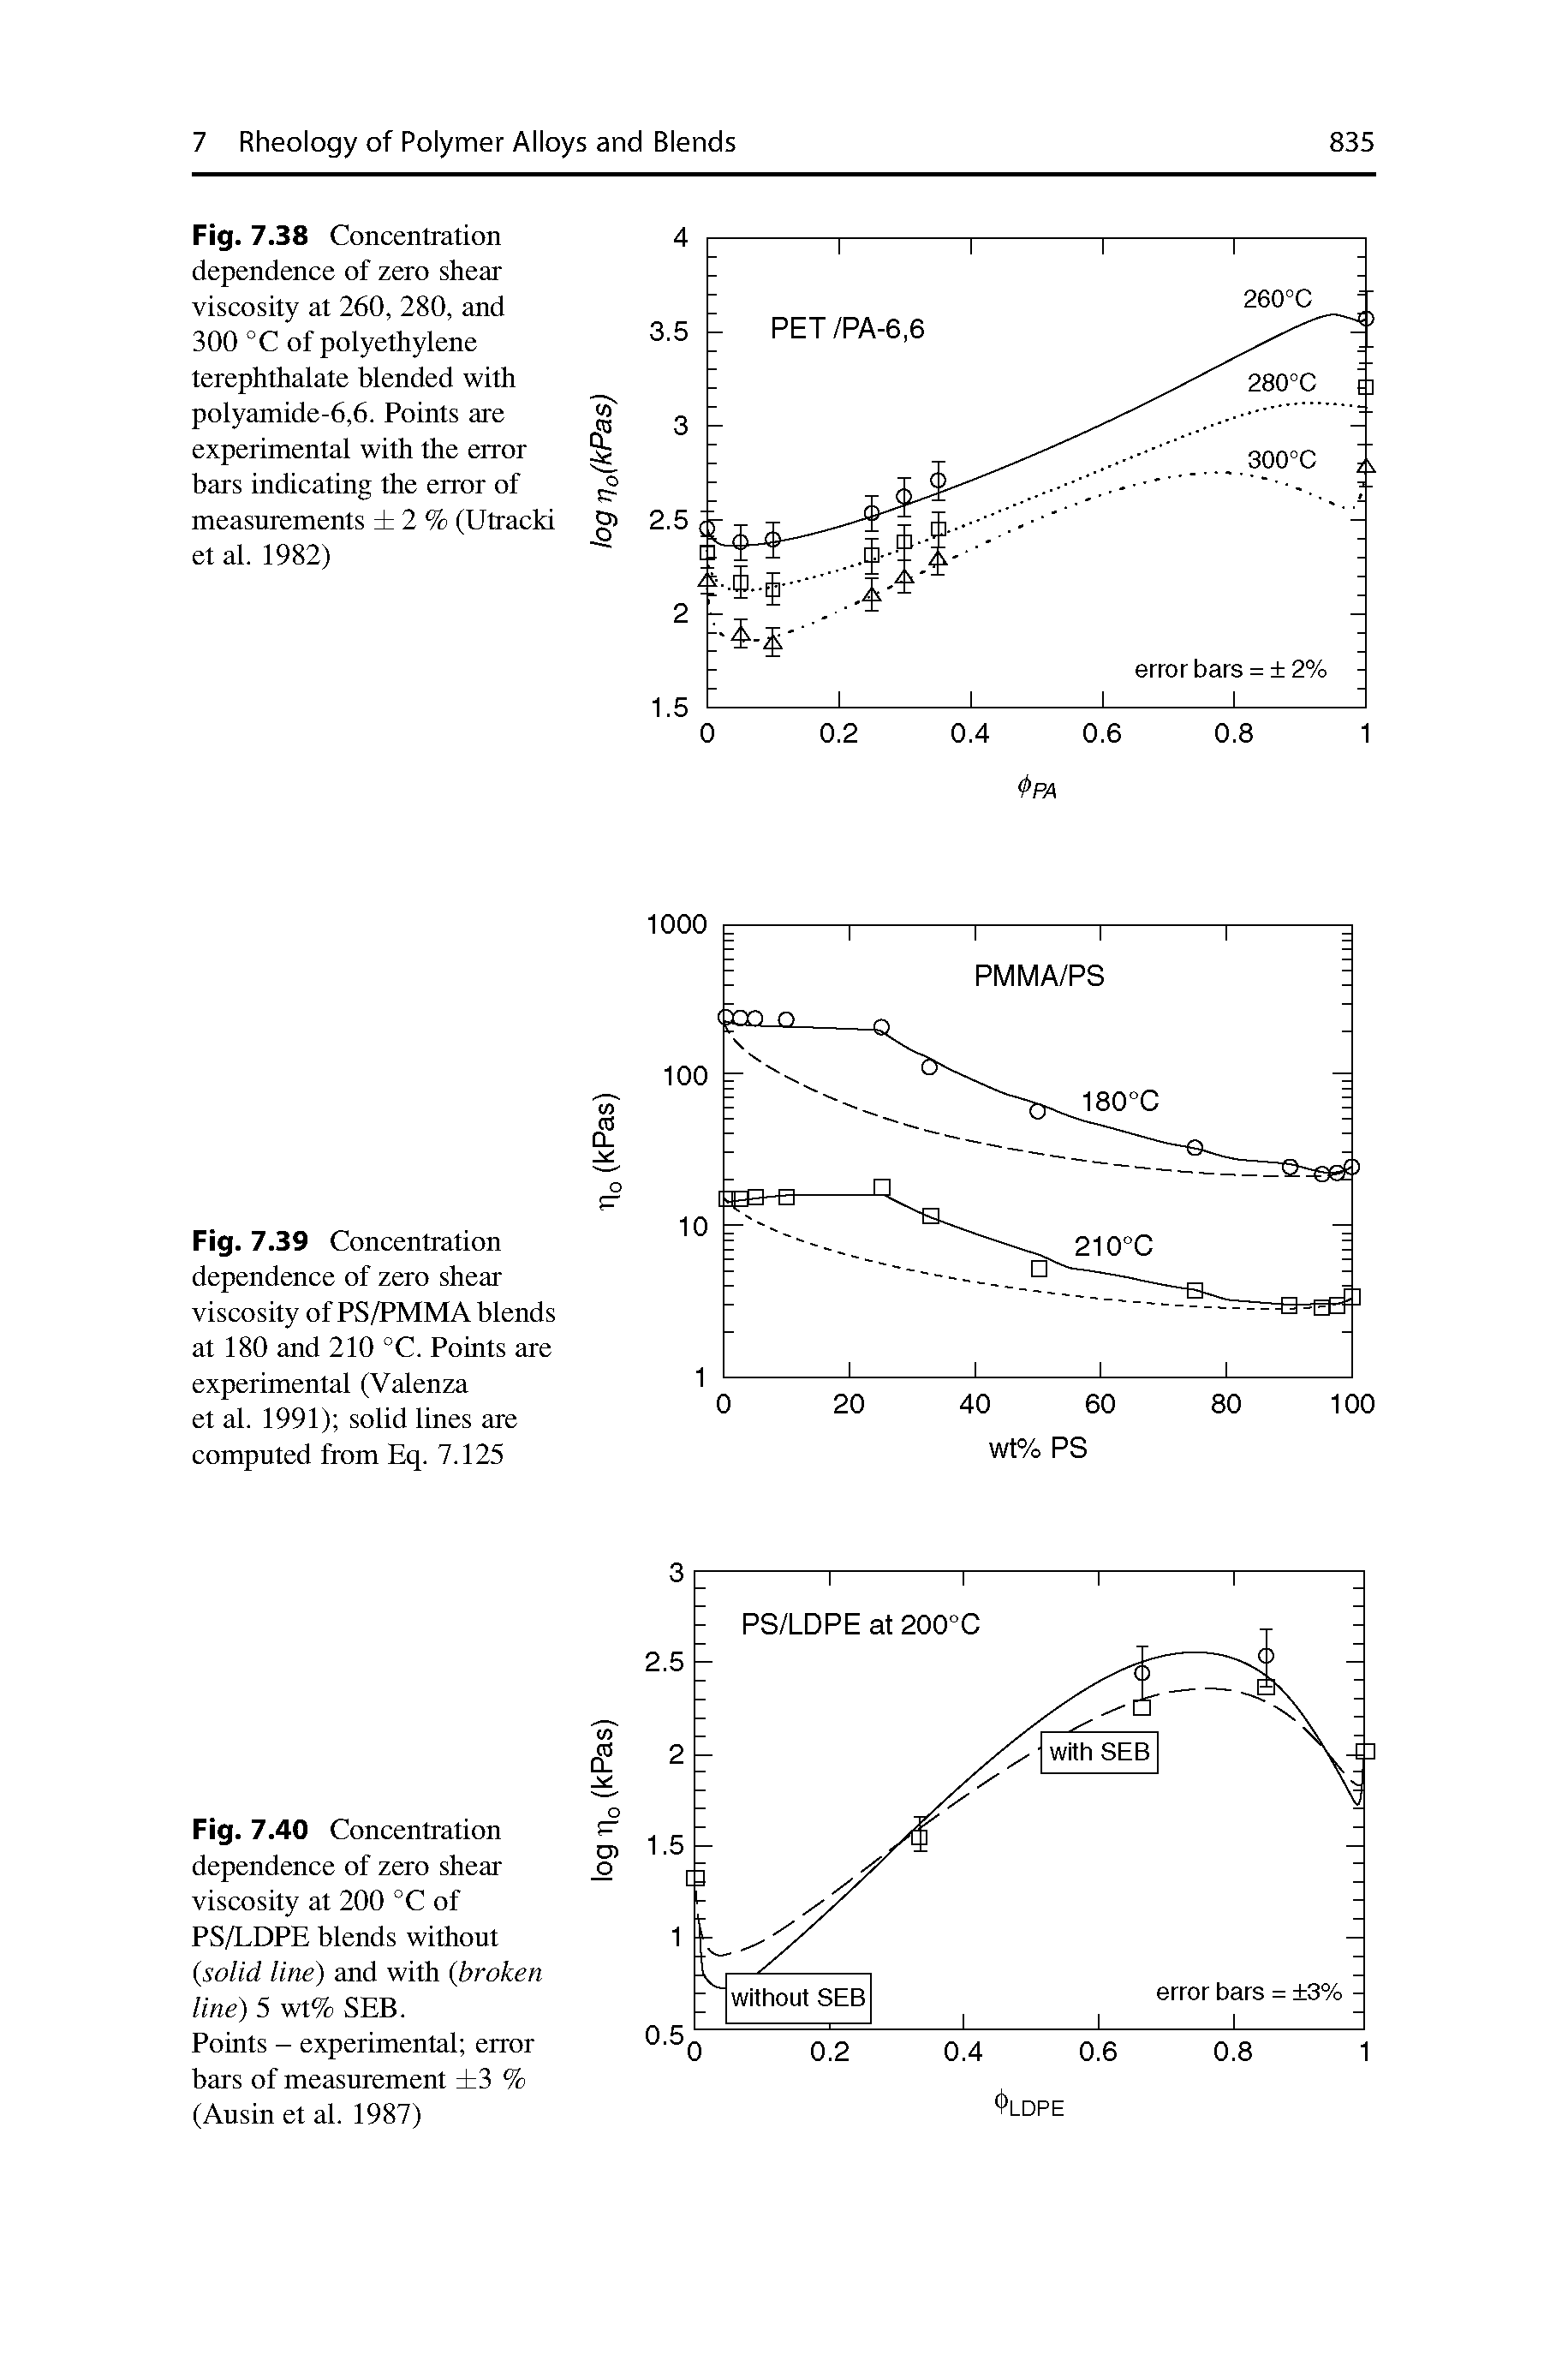 Fig. 7.38 Concentration dependence of zero shear viscosity at 260, 280, and 300 °C of polyethylene terephthalate blended with polyamide-6,6. Points are experimental with the error bars indicating the error of measurements 2 % (Utracki et al. 1982)...